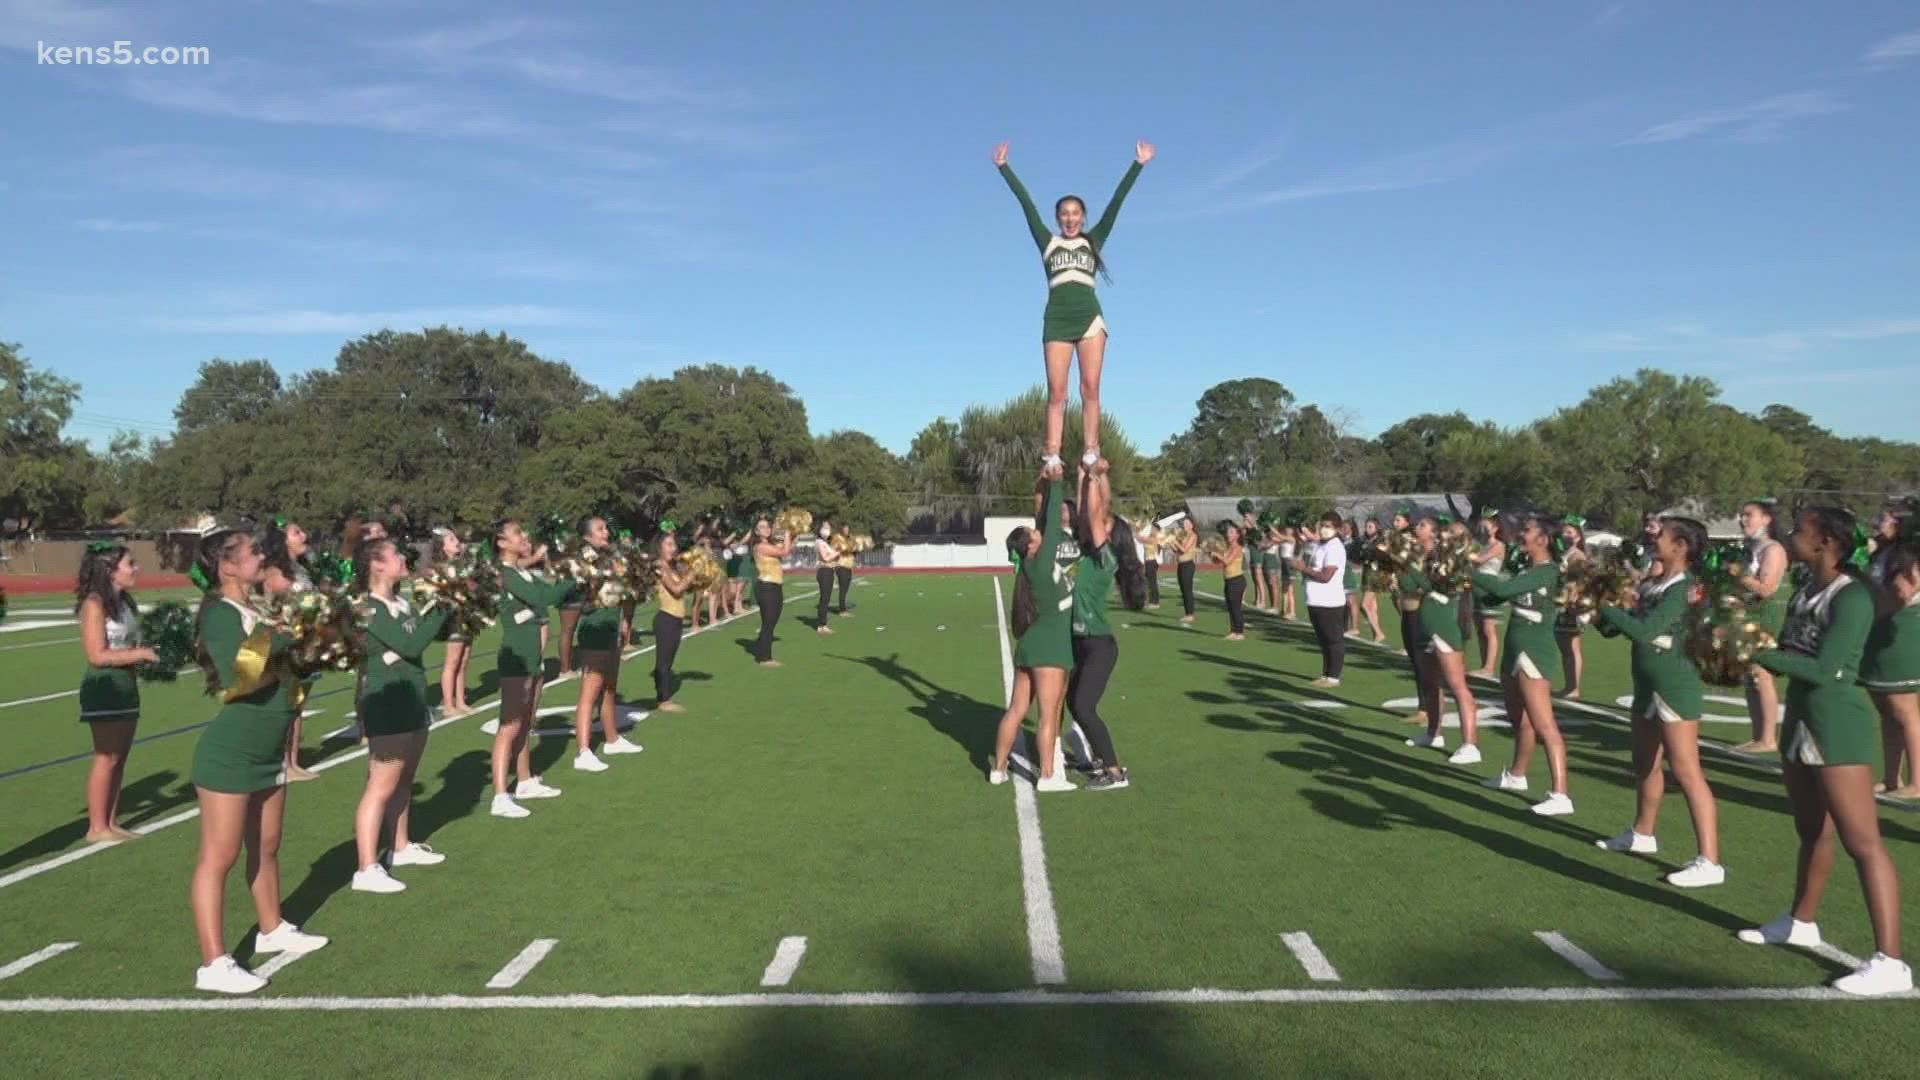 The cheer and dance squads all work together to lift and support each other.